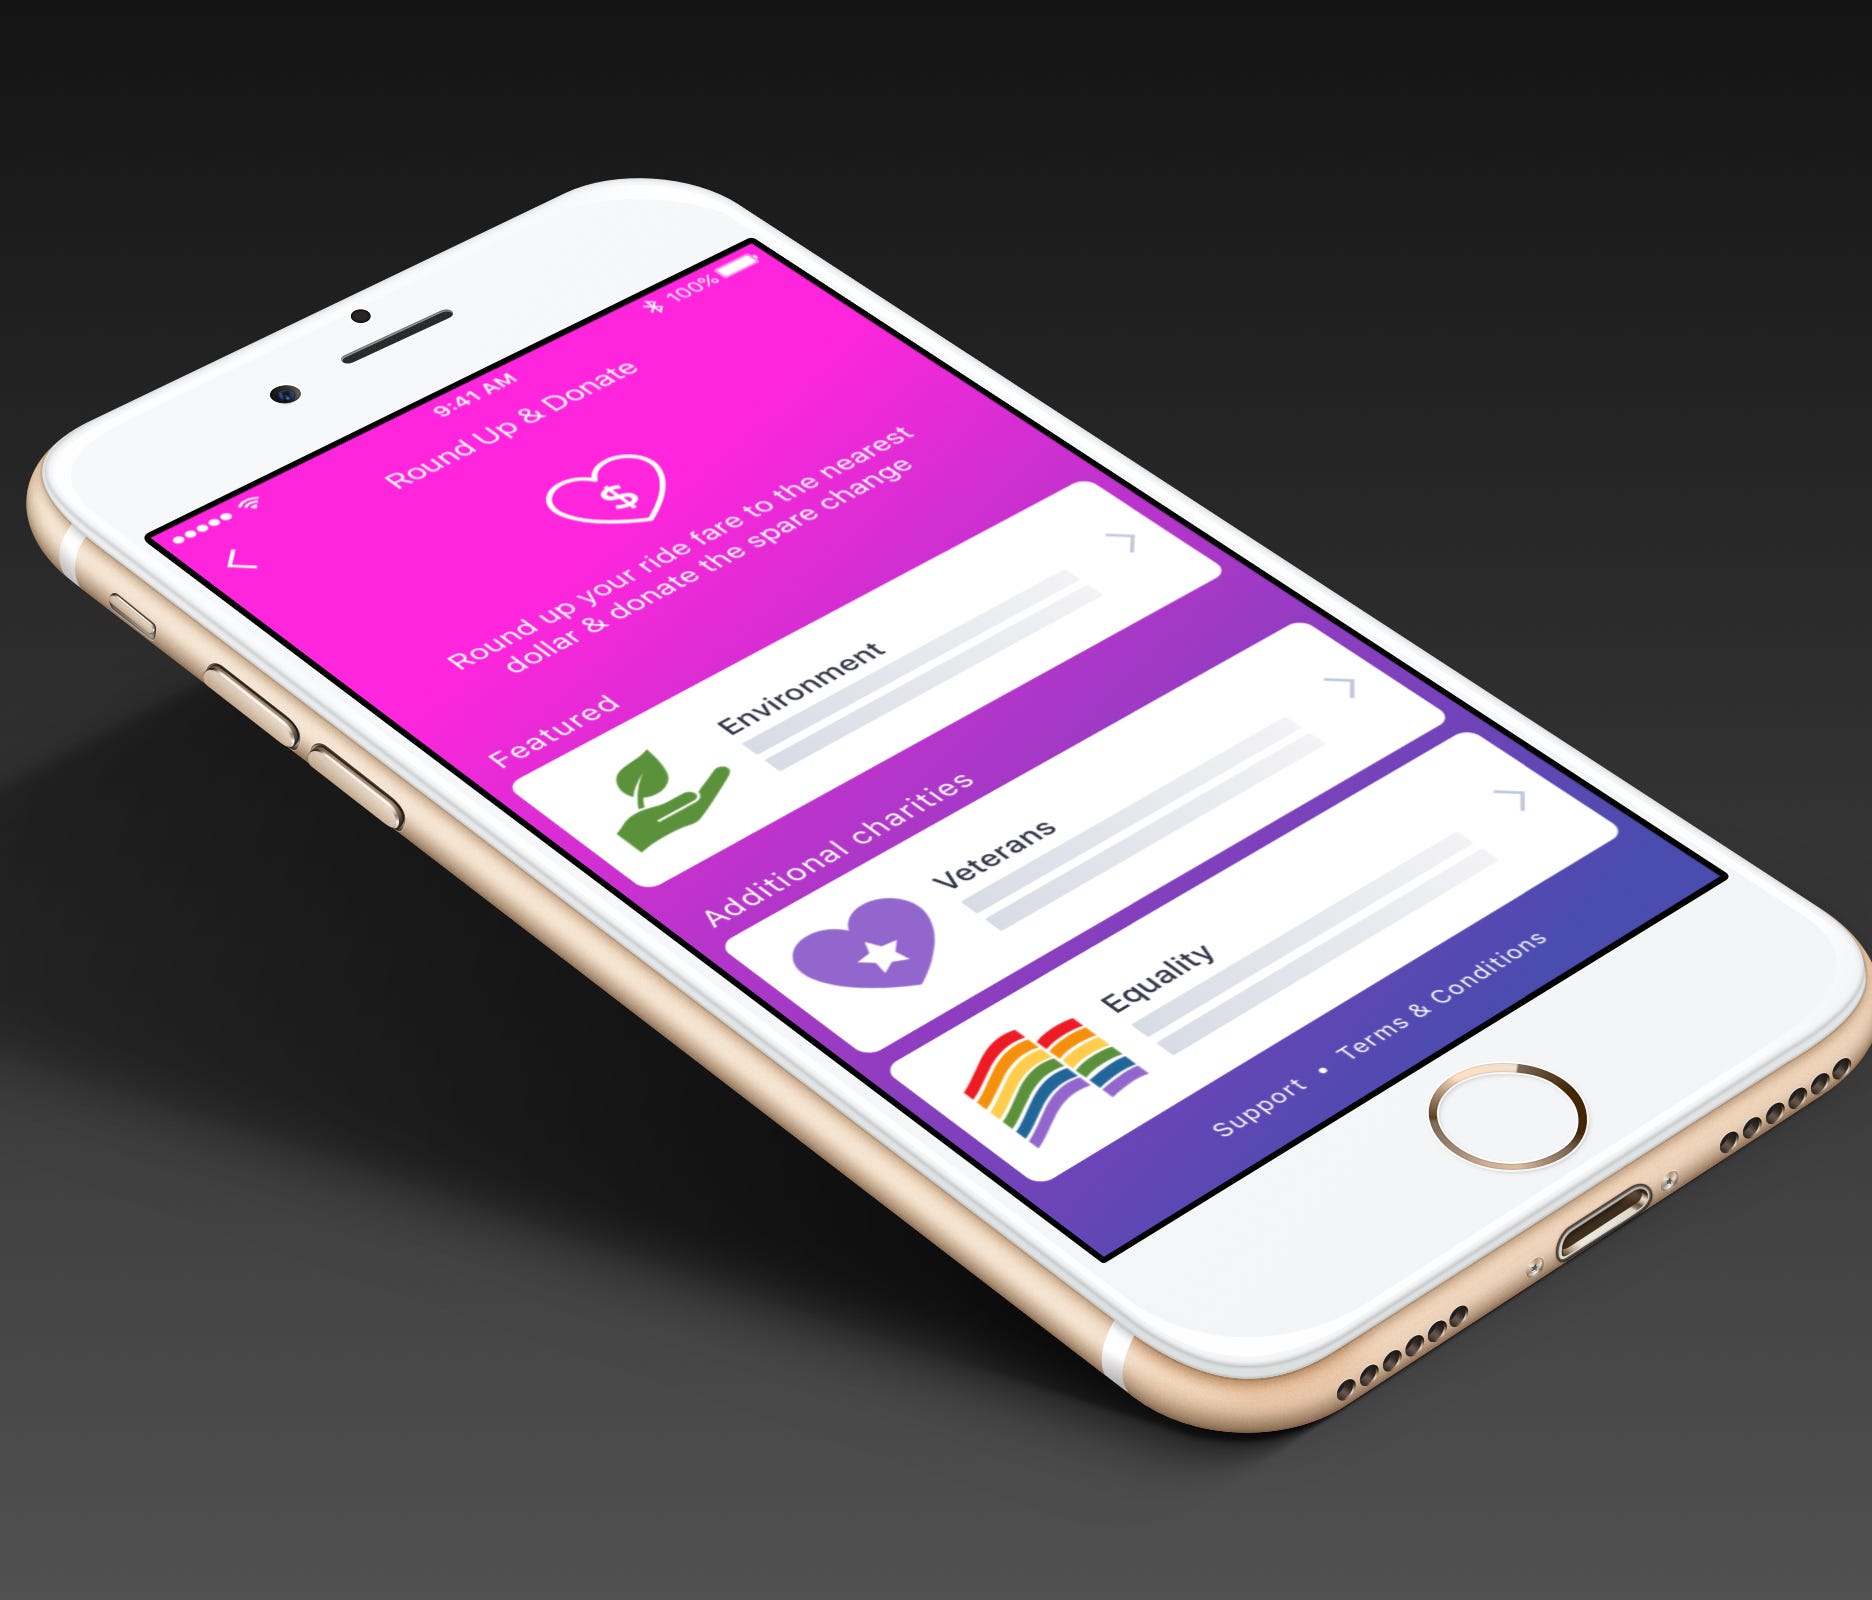 Lyft's new Round Up & Donate feature gives riders the option of rounding up on a fare and donating the difference to charity.